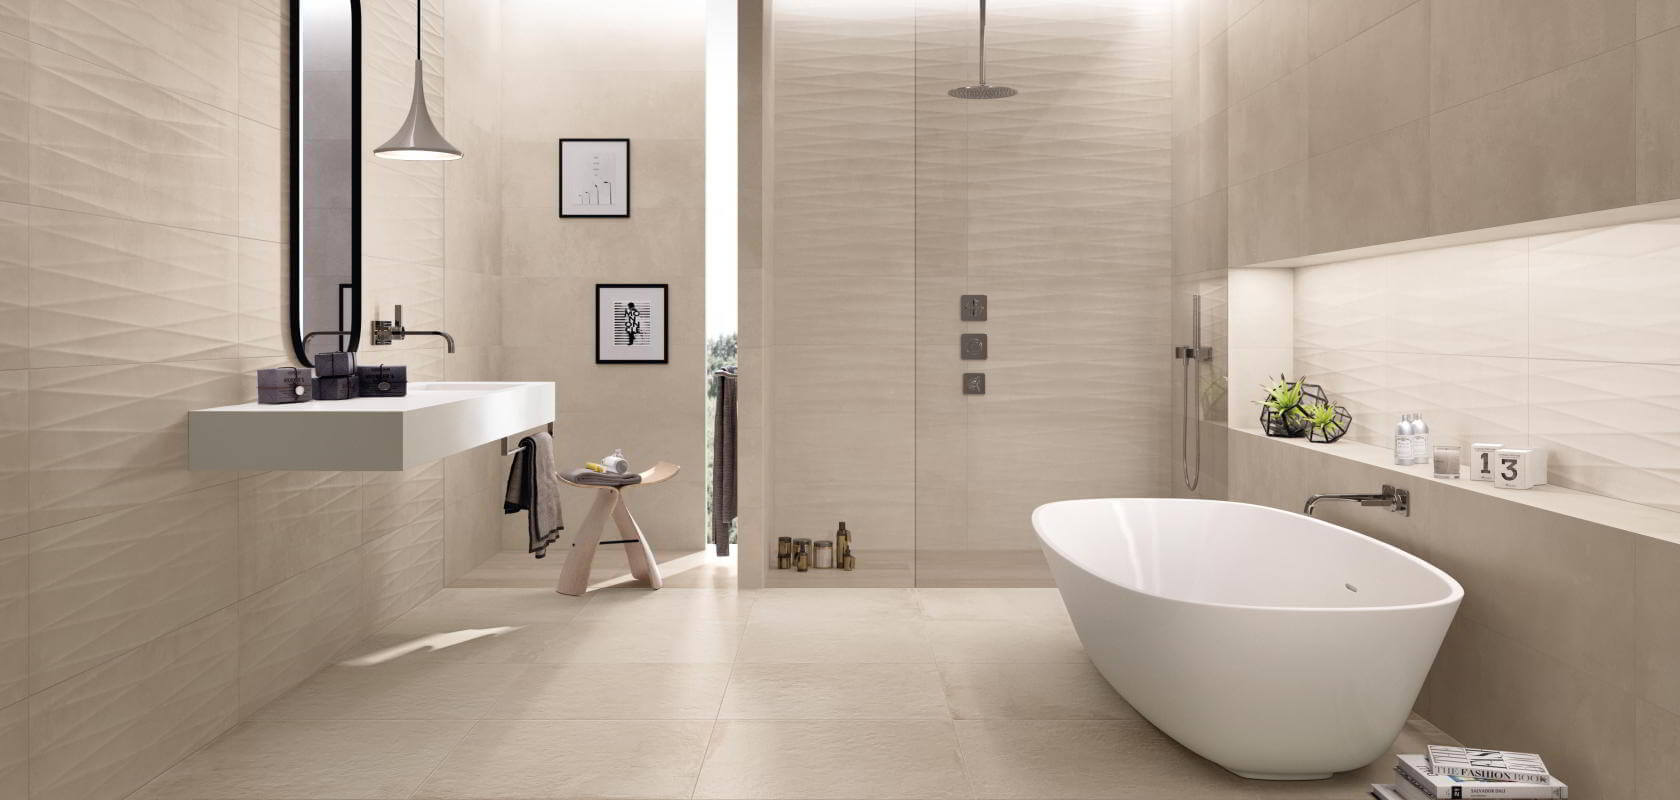 Different Ways To Use Bathroom Wall Tiles For Impact